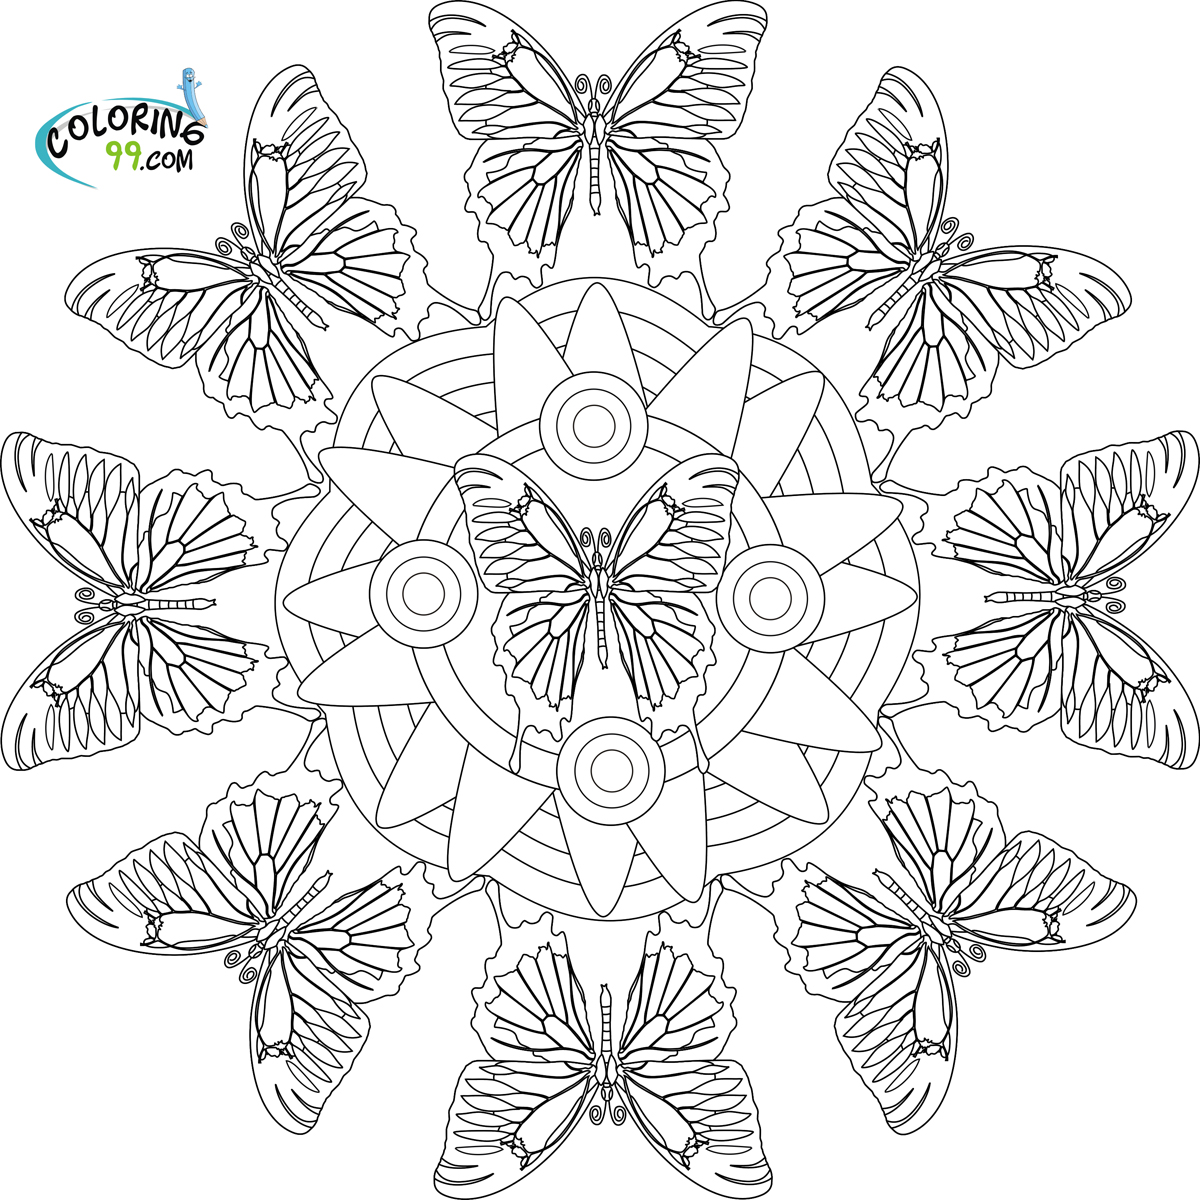  Mandala Coloring pages | FREE coloring pages | #57